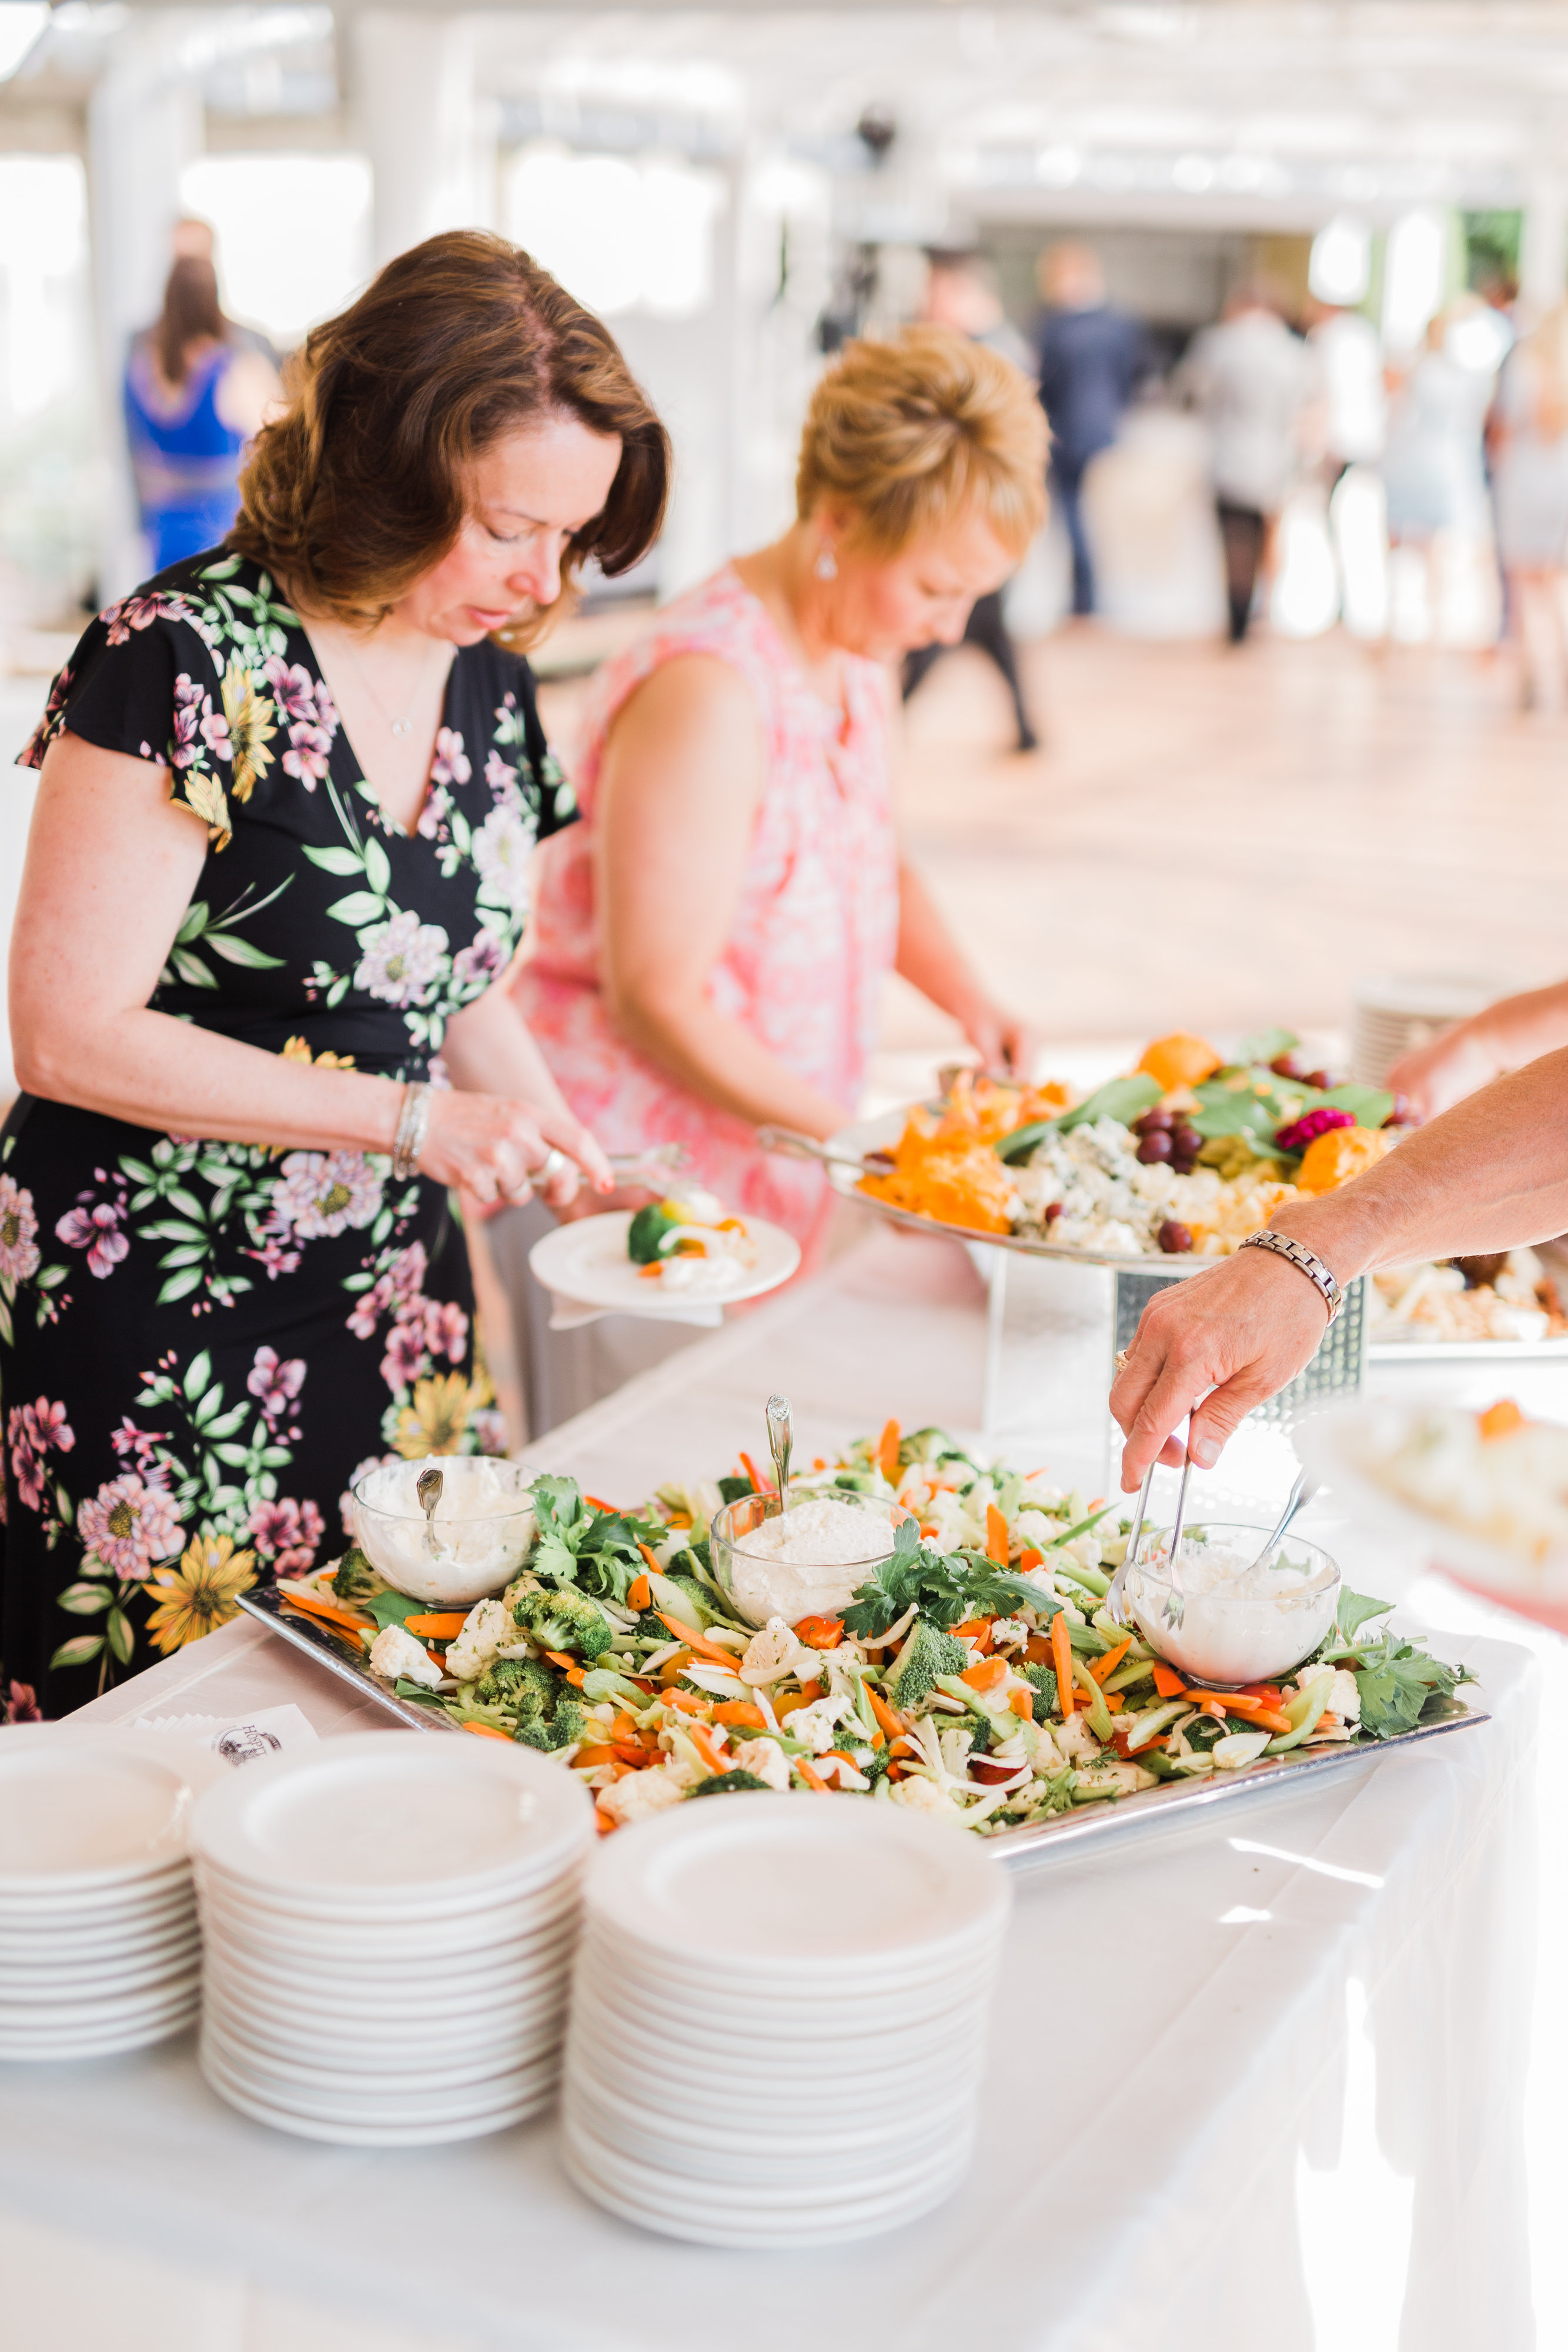 wedding guest selecting food from buffet